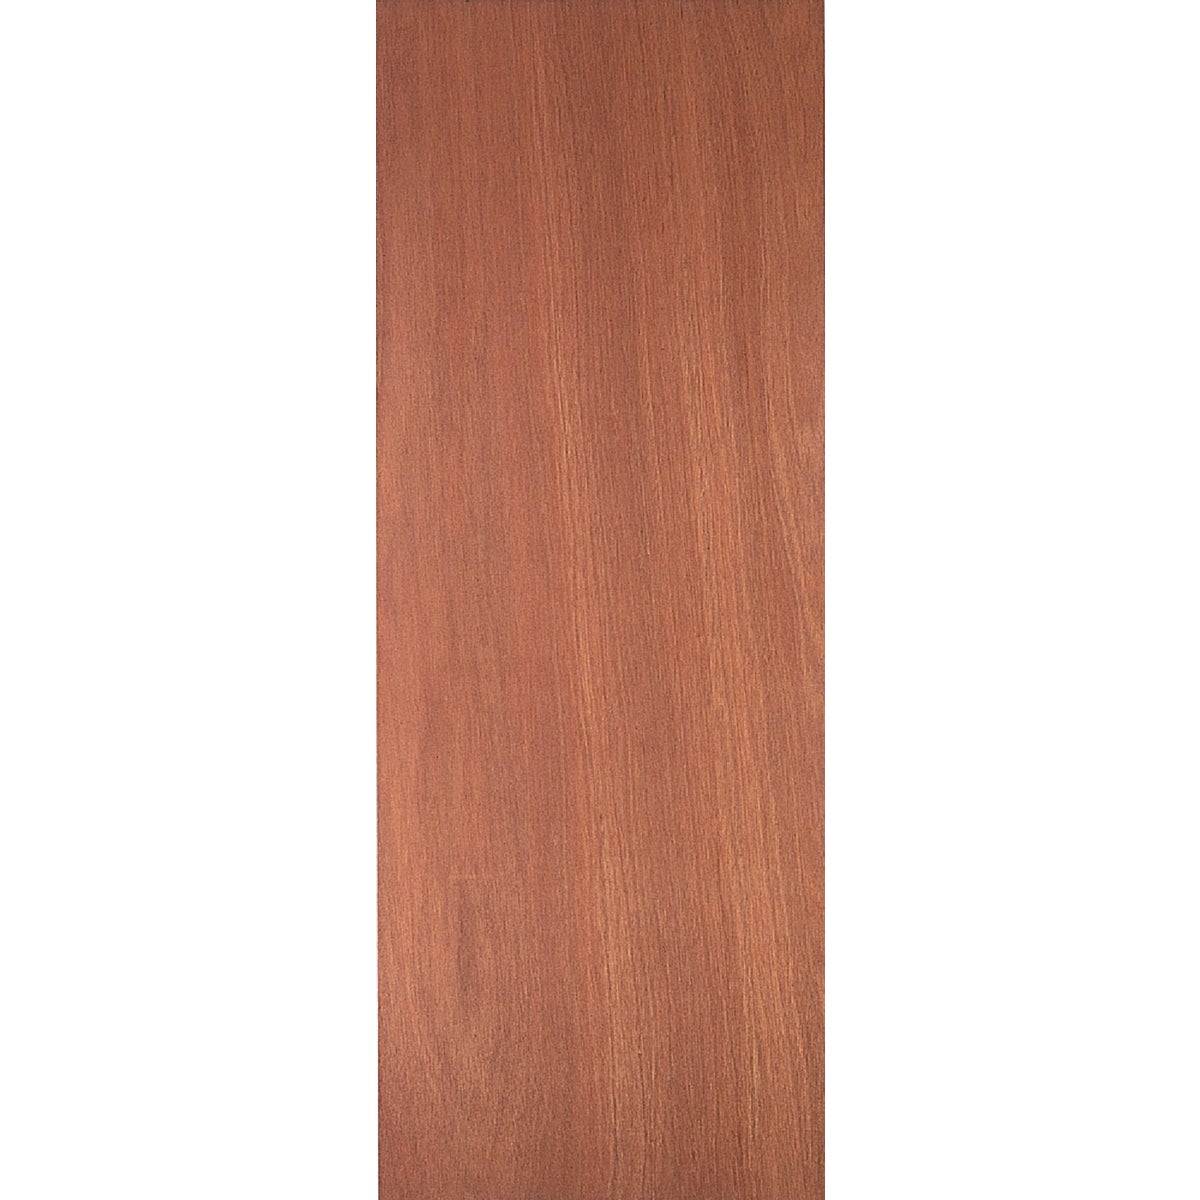 Item 161577, Full and square edge lauan door slabs have finger jointed stiles, and fiber